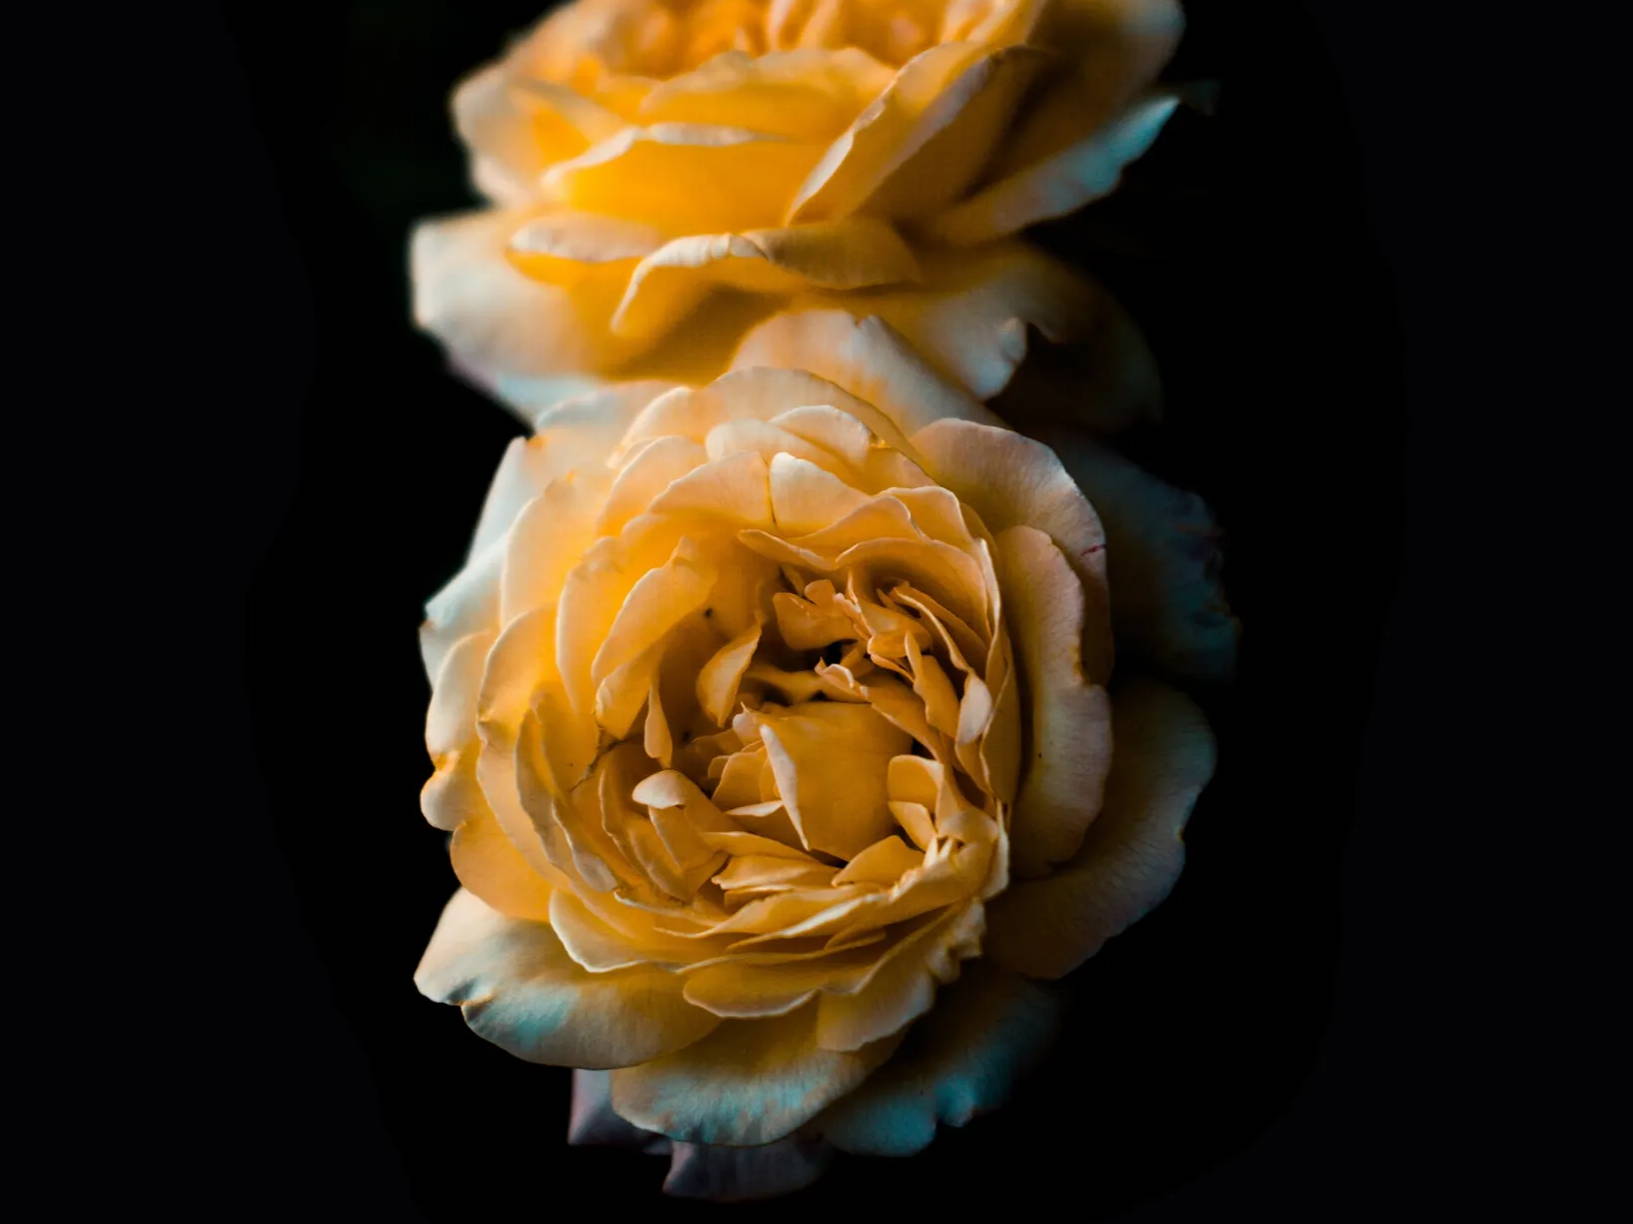 Two yellow roses against a black background